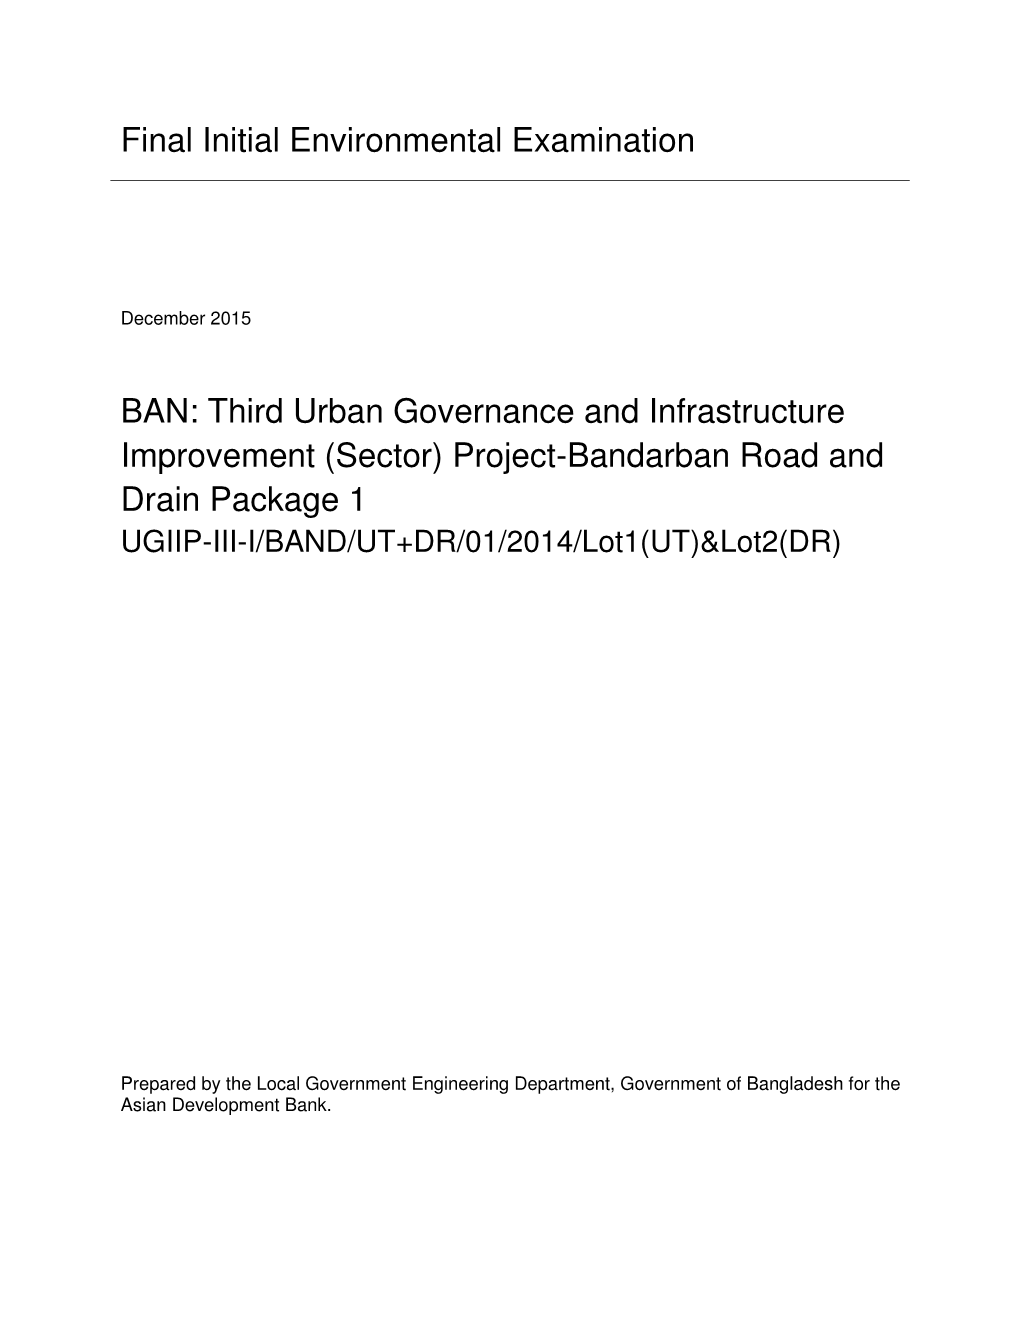 Third Urban Governance and Infrastructure Improvement (Sector) Project: Bandarban Road and Drain Package 1